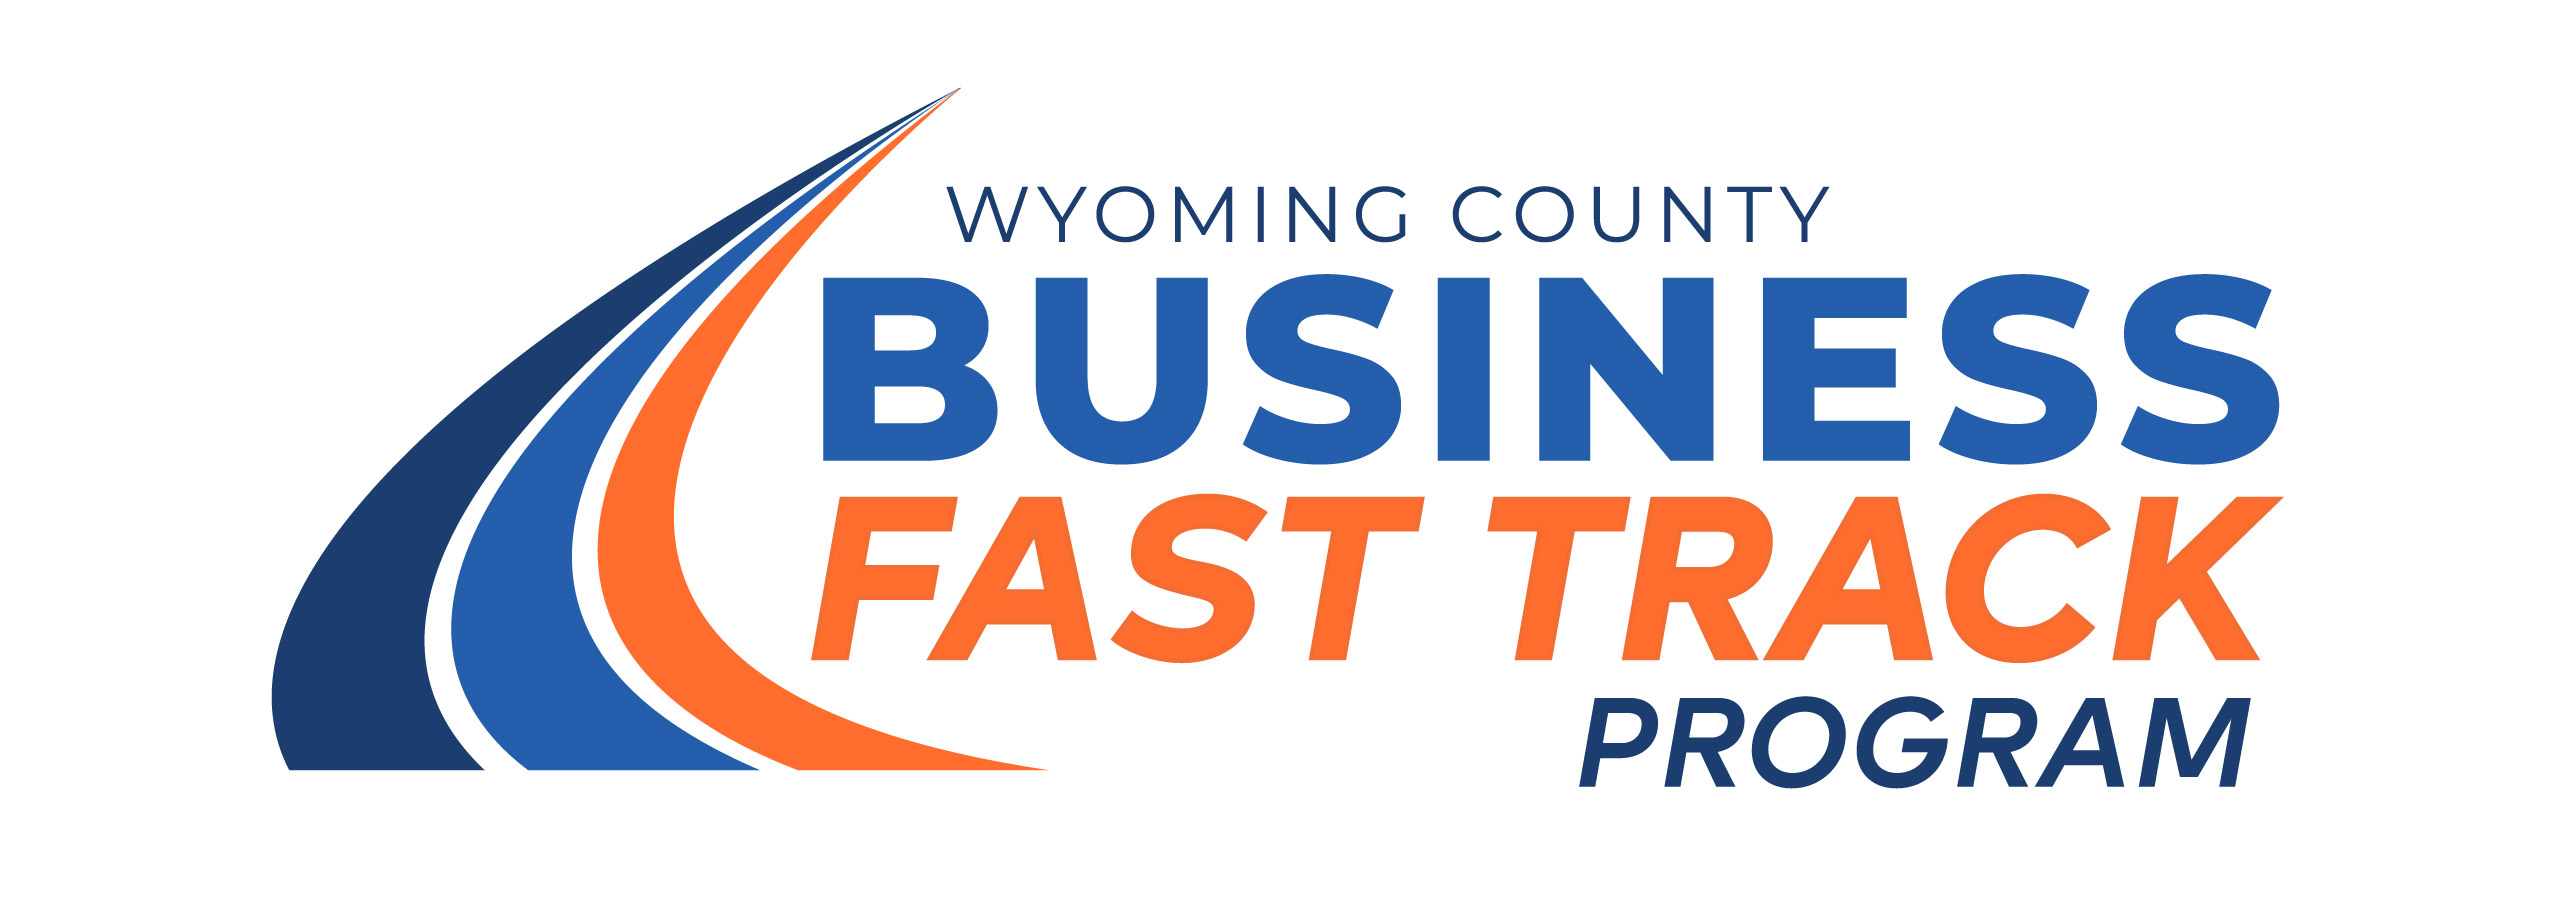 Wyoming County Business Fast Track Program